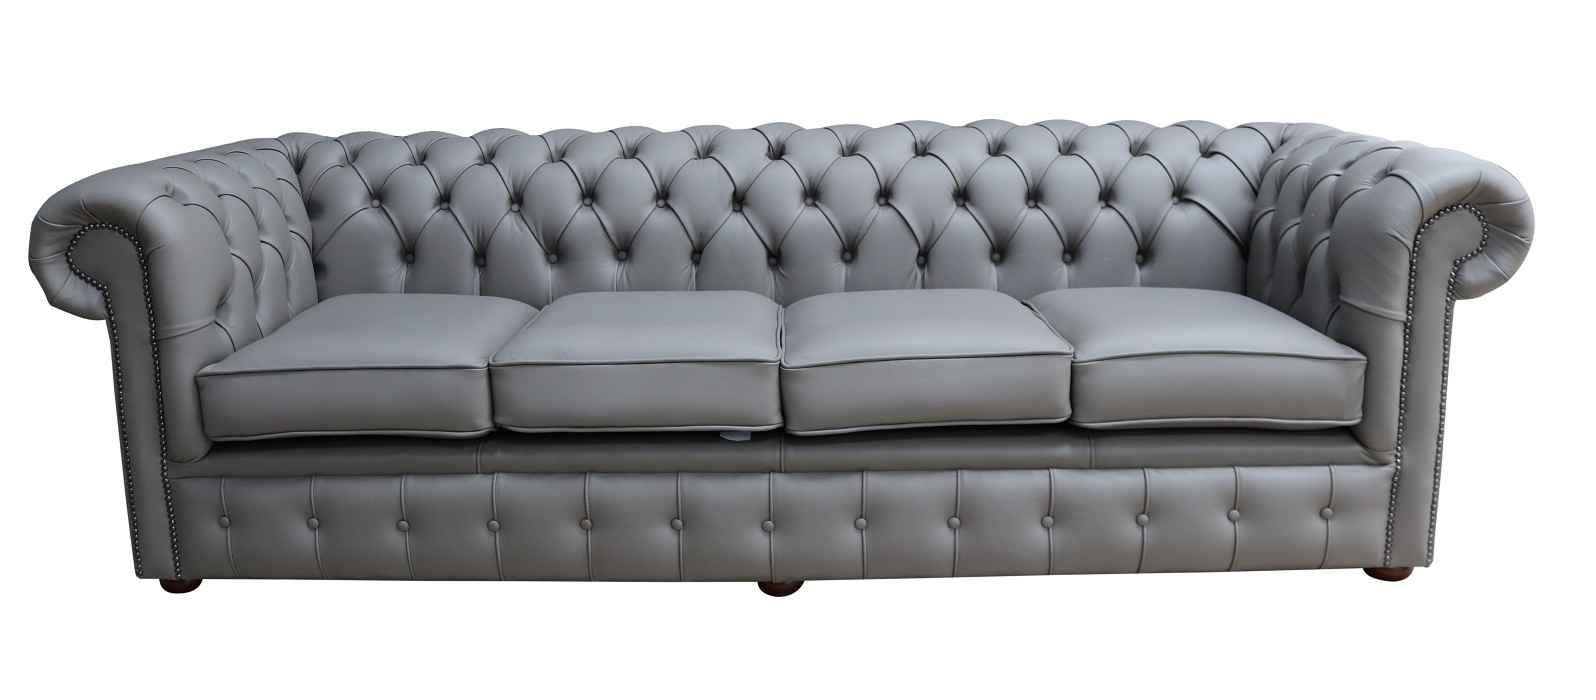 Unlock Timeless Elegance with an Antique Chesterfield Sofa  %Post Title